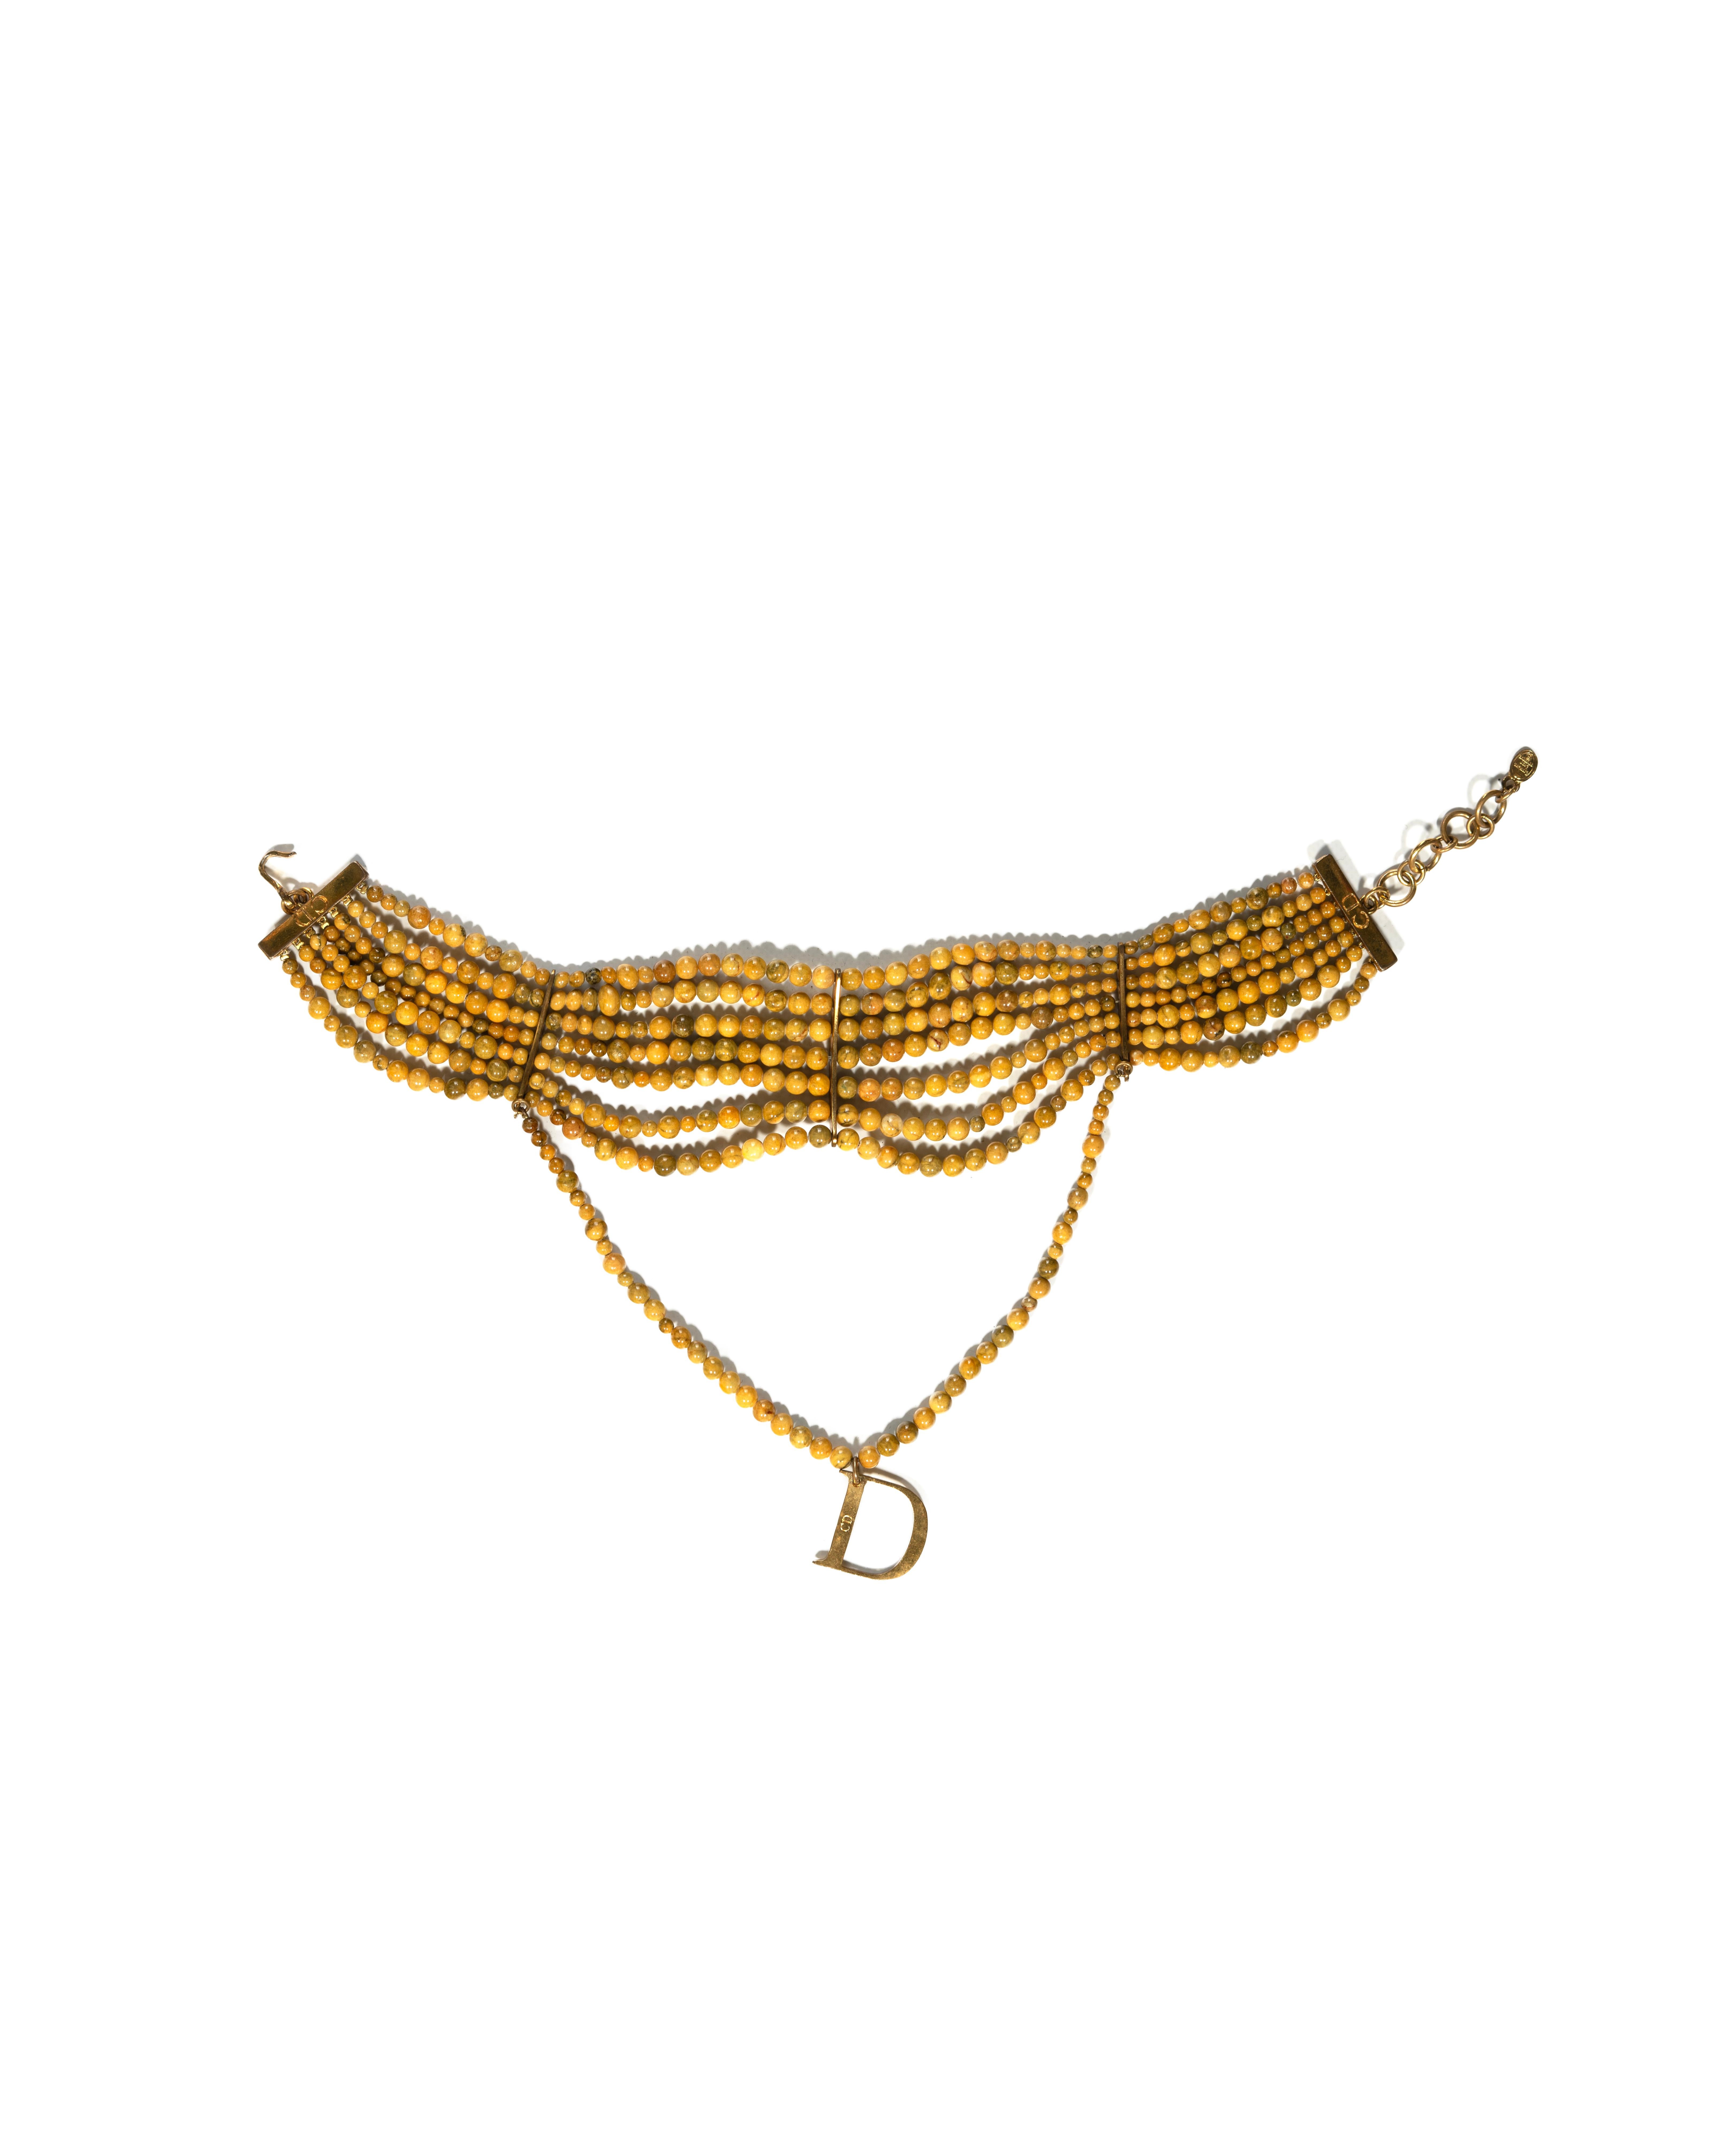 ▪ Archival Christian Dior 'Masai' Choker Necklace 
▪ Creative Director: John Galliano 
▪ c. 1998  
▪ Sold by One of a Kind Archive 
▪ Embellished with 7 strands of exquisite marbled glass beads 
▪ The centerpiece boasts an additional hanging strand